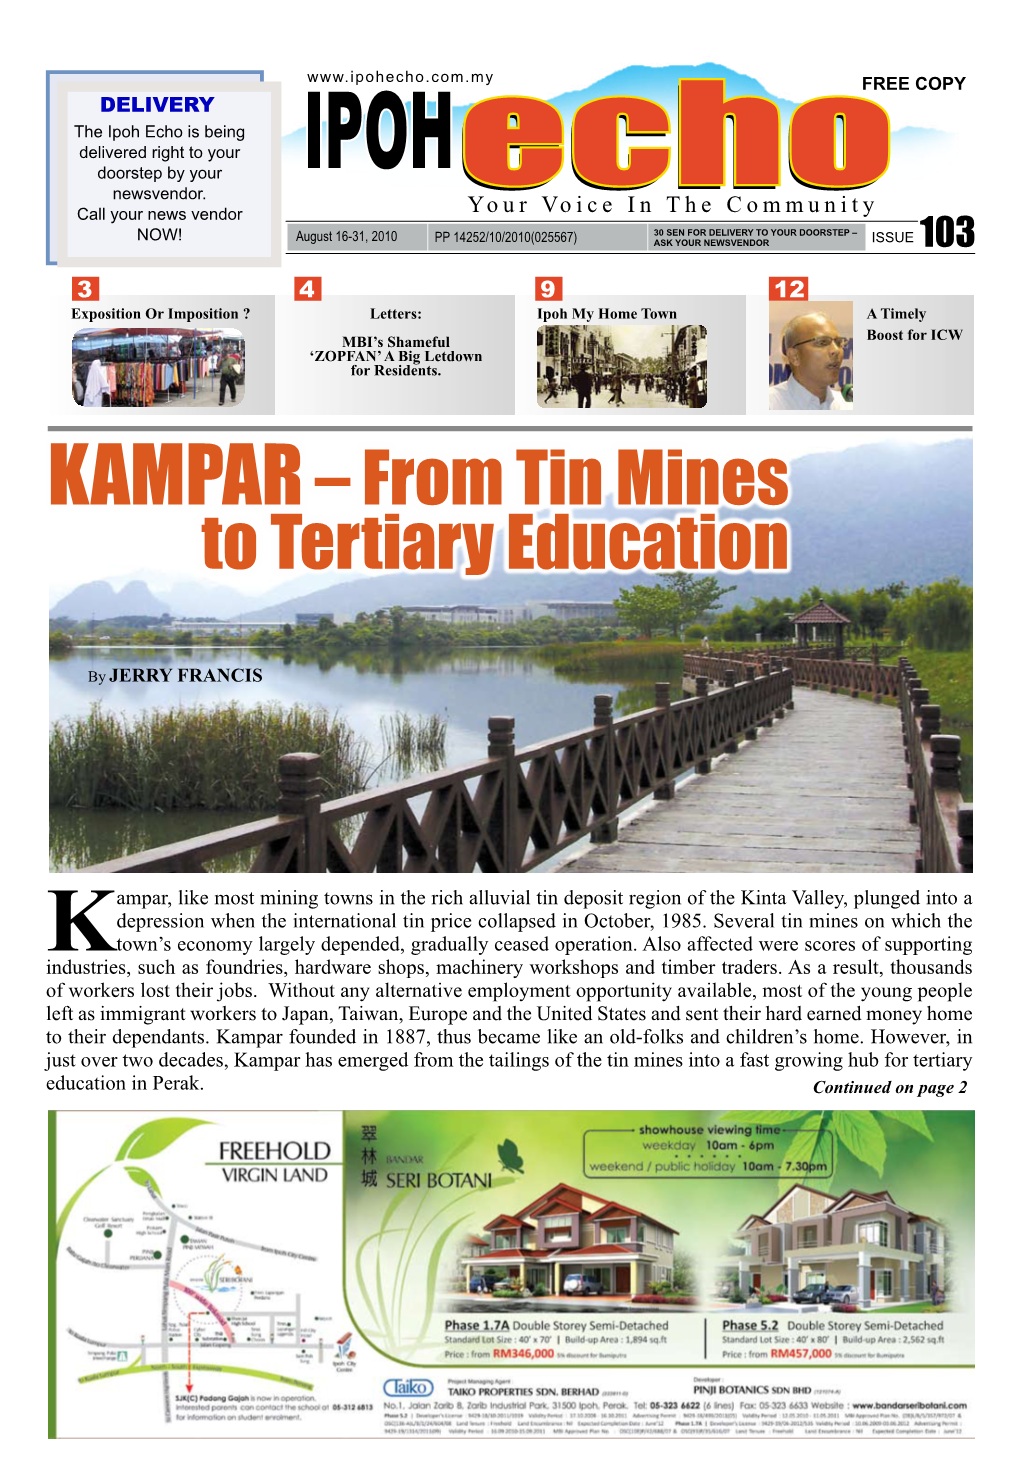 KAMPAR – from Tin Mines to Tertiary Education